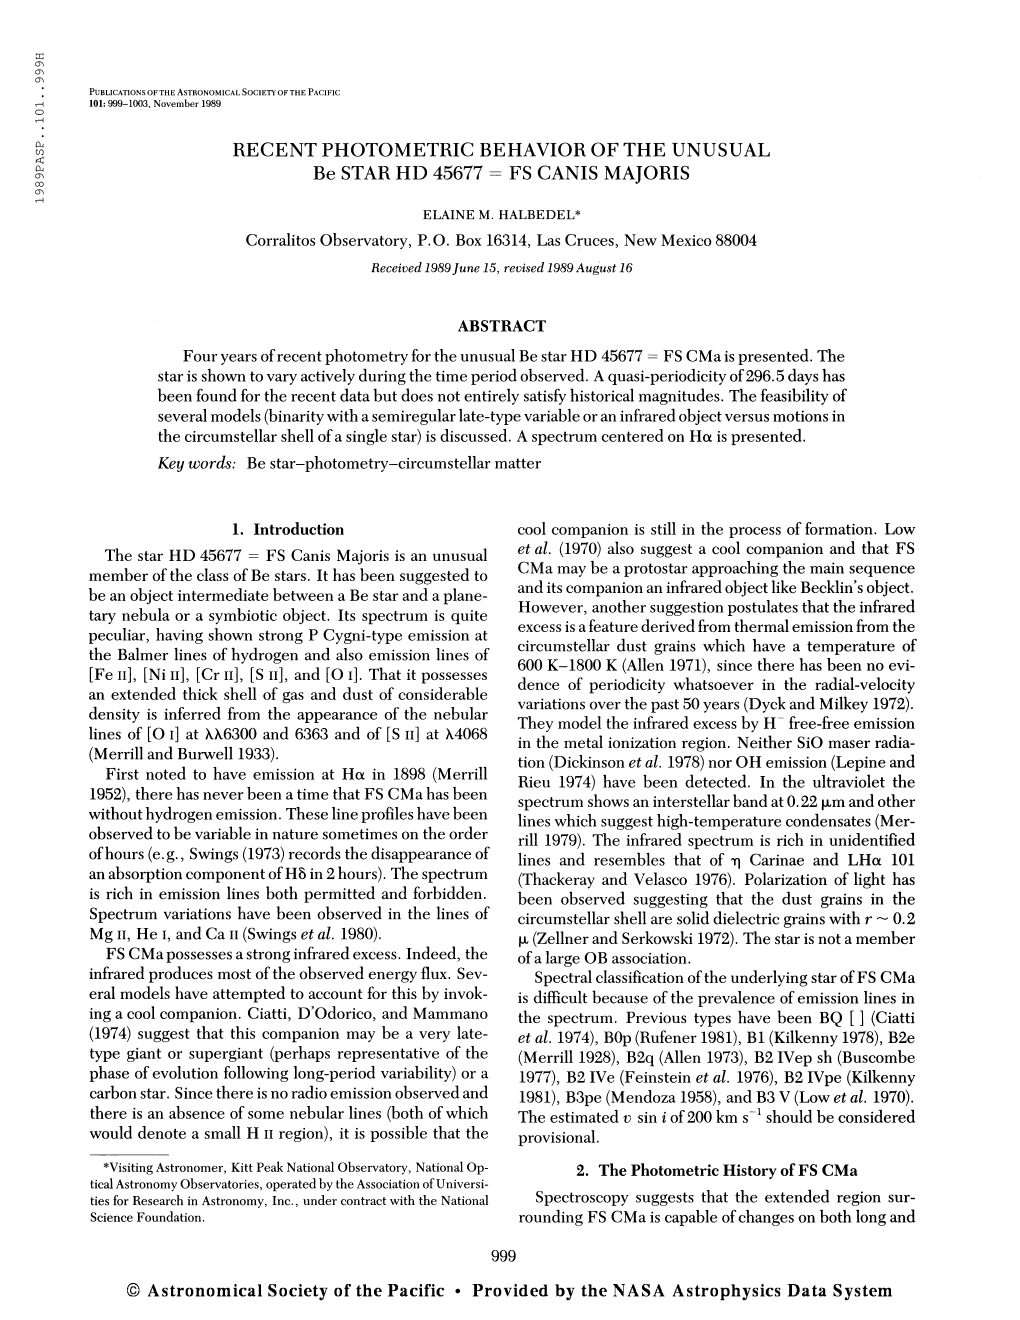 Publications of the Astronomical Society of the Pacific 101: 999-1003, November 1989